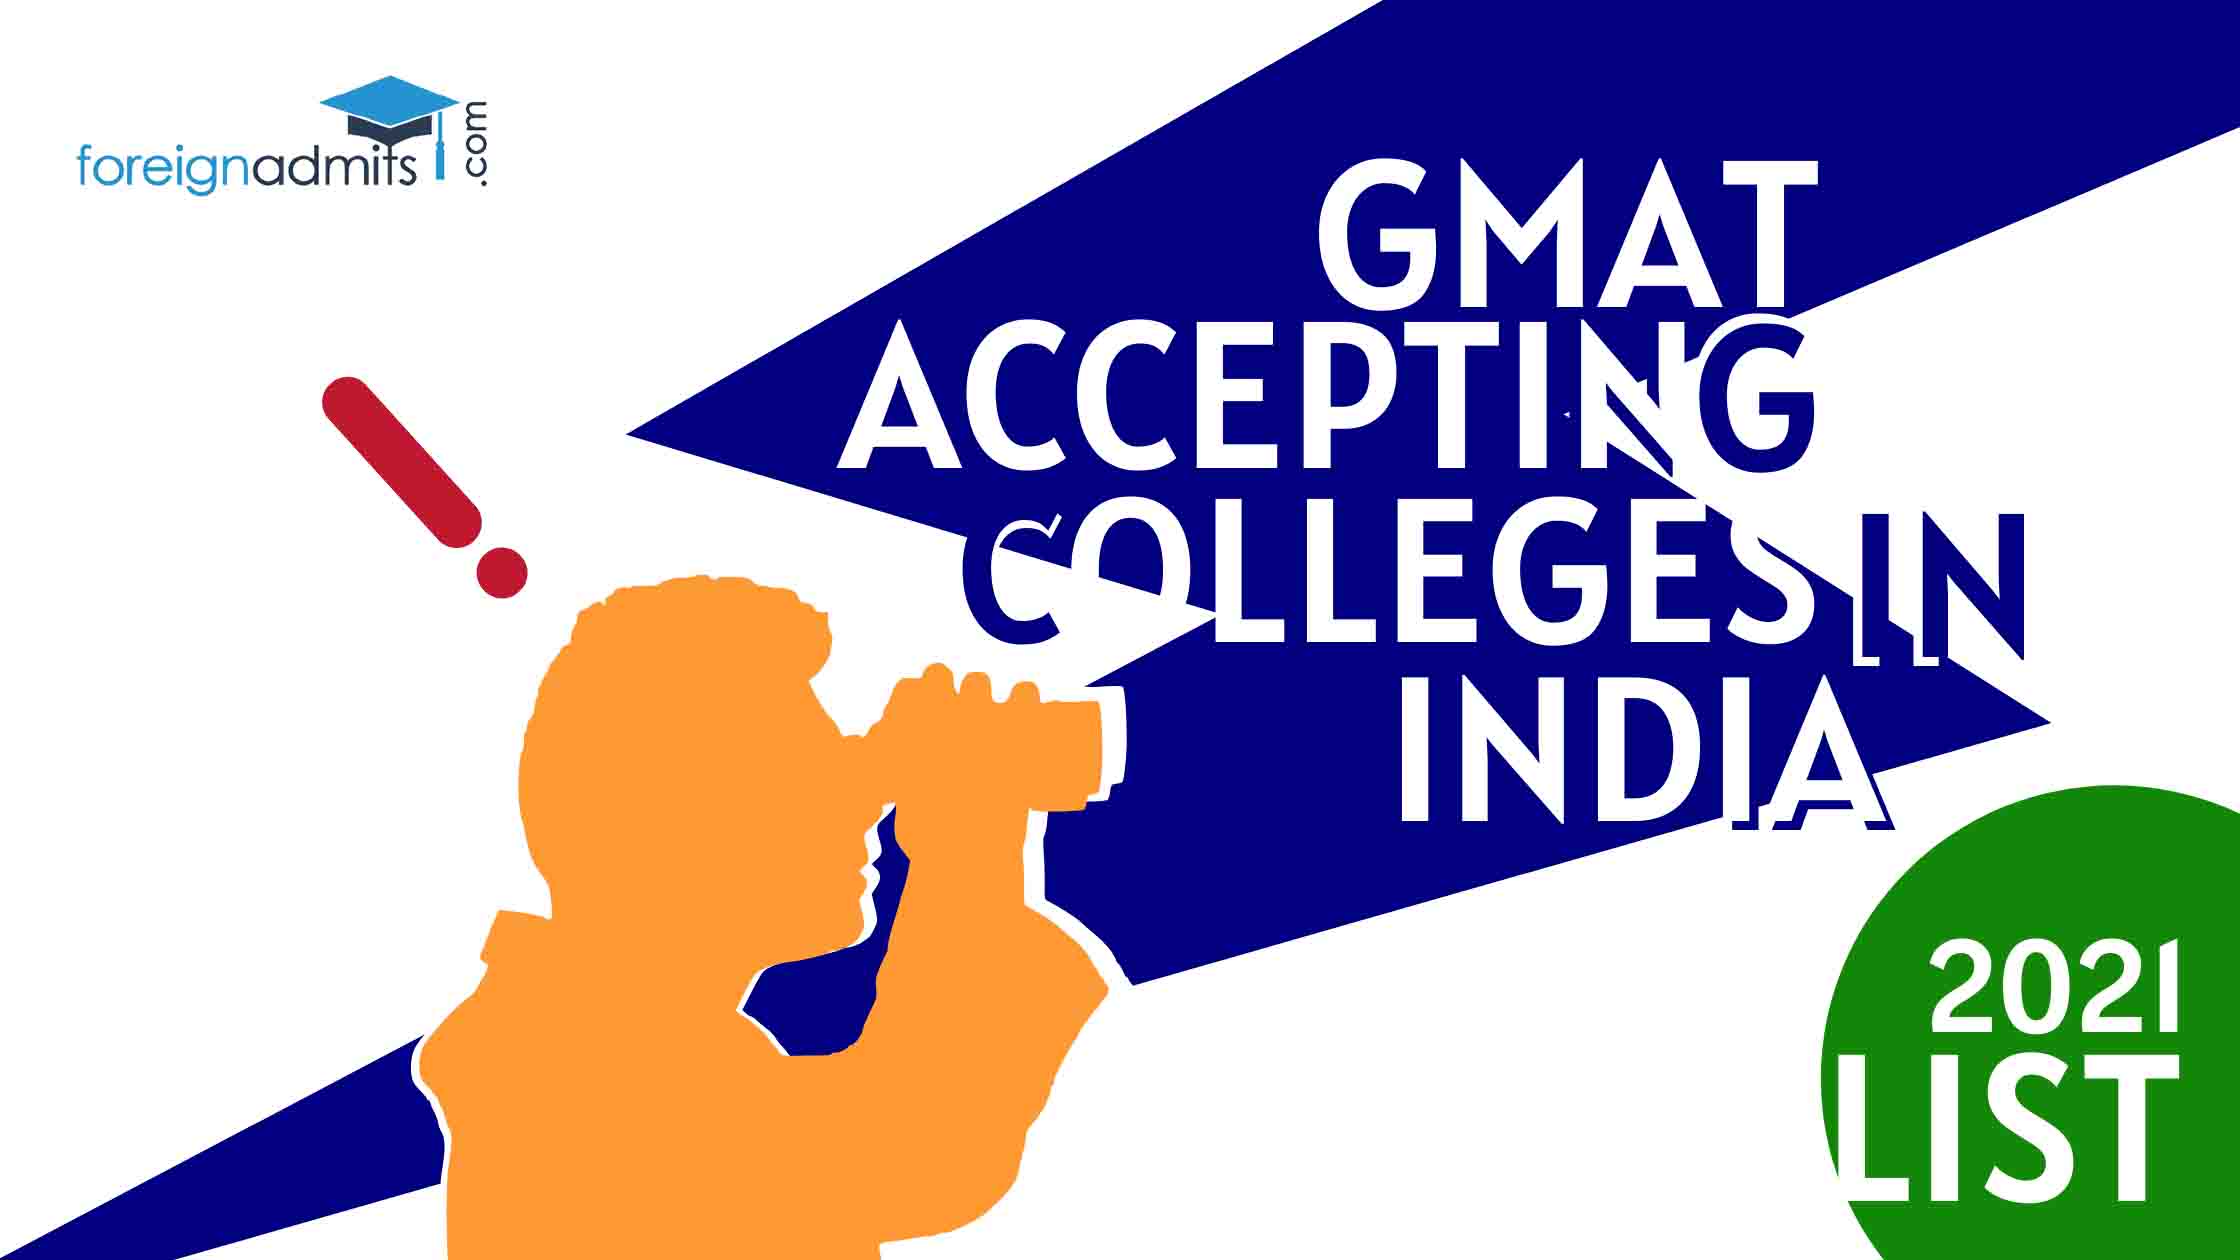 GMAT Accepting Colleges in India